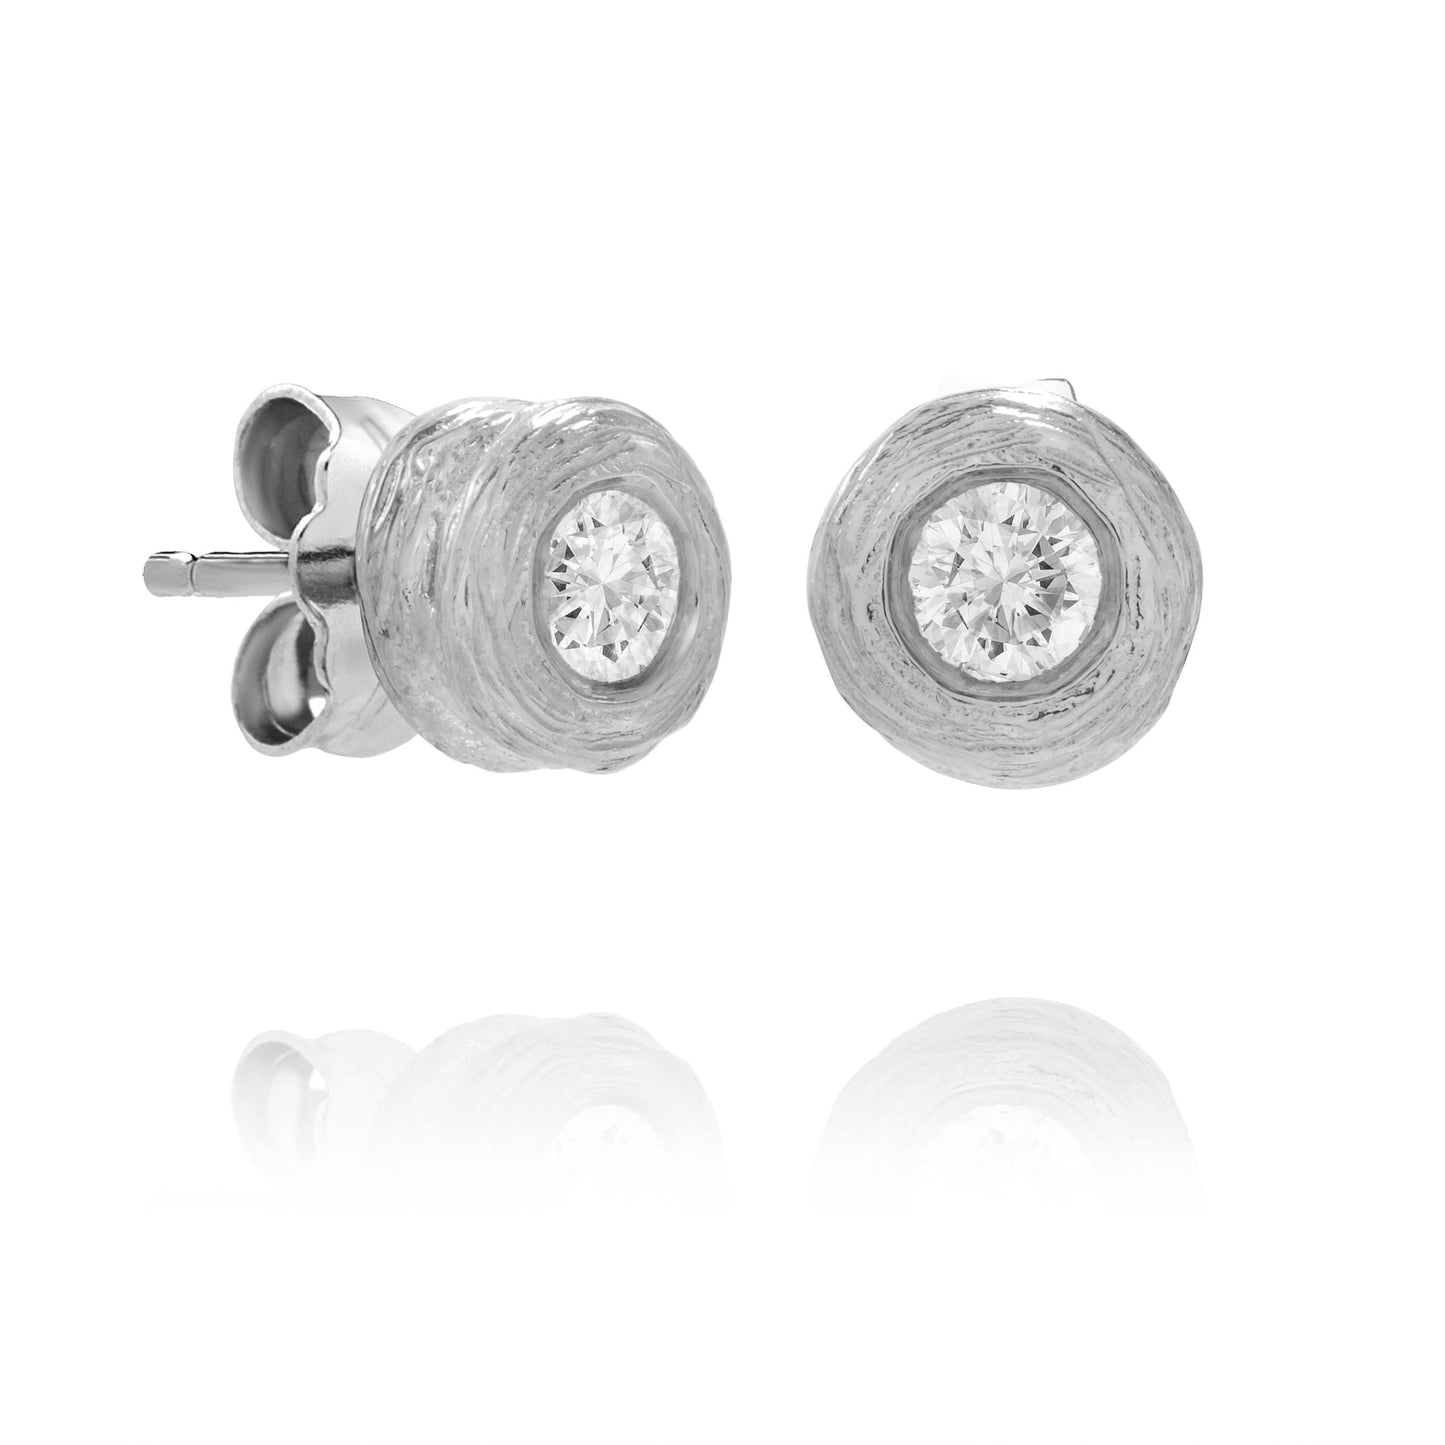 Dalia T Online Earrings Textured Gold Signature Collection 14KT White Gold 0.15CT Diamond Stud Earrings